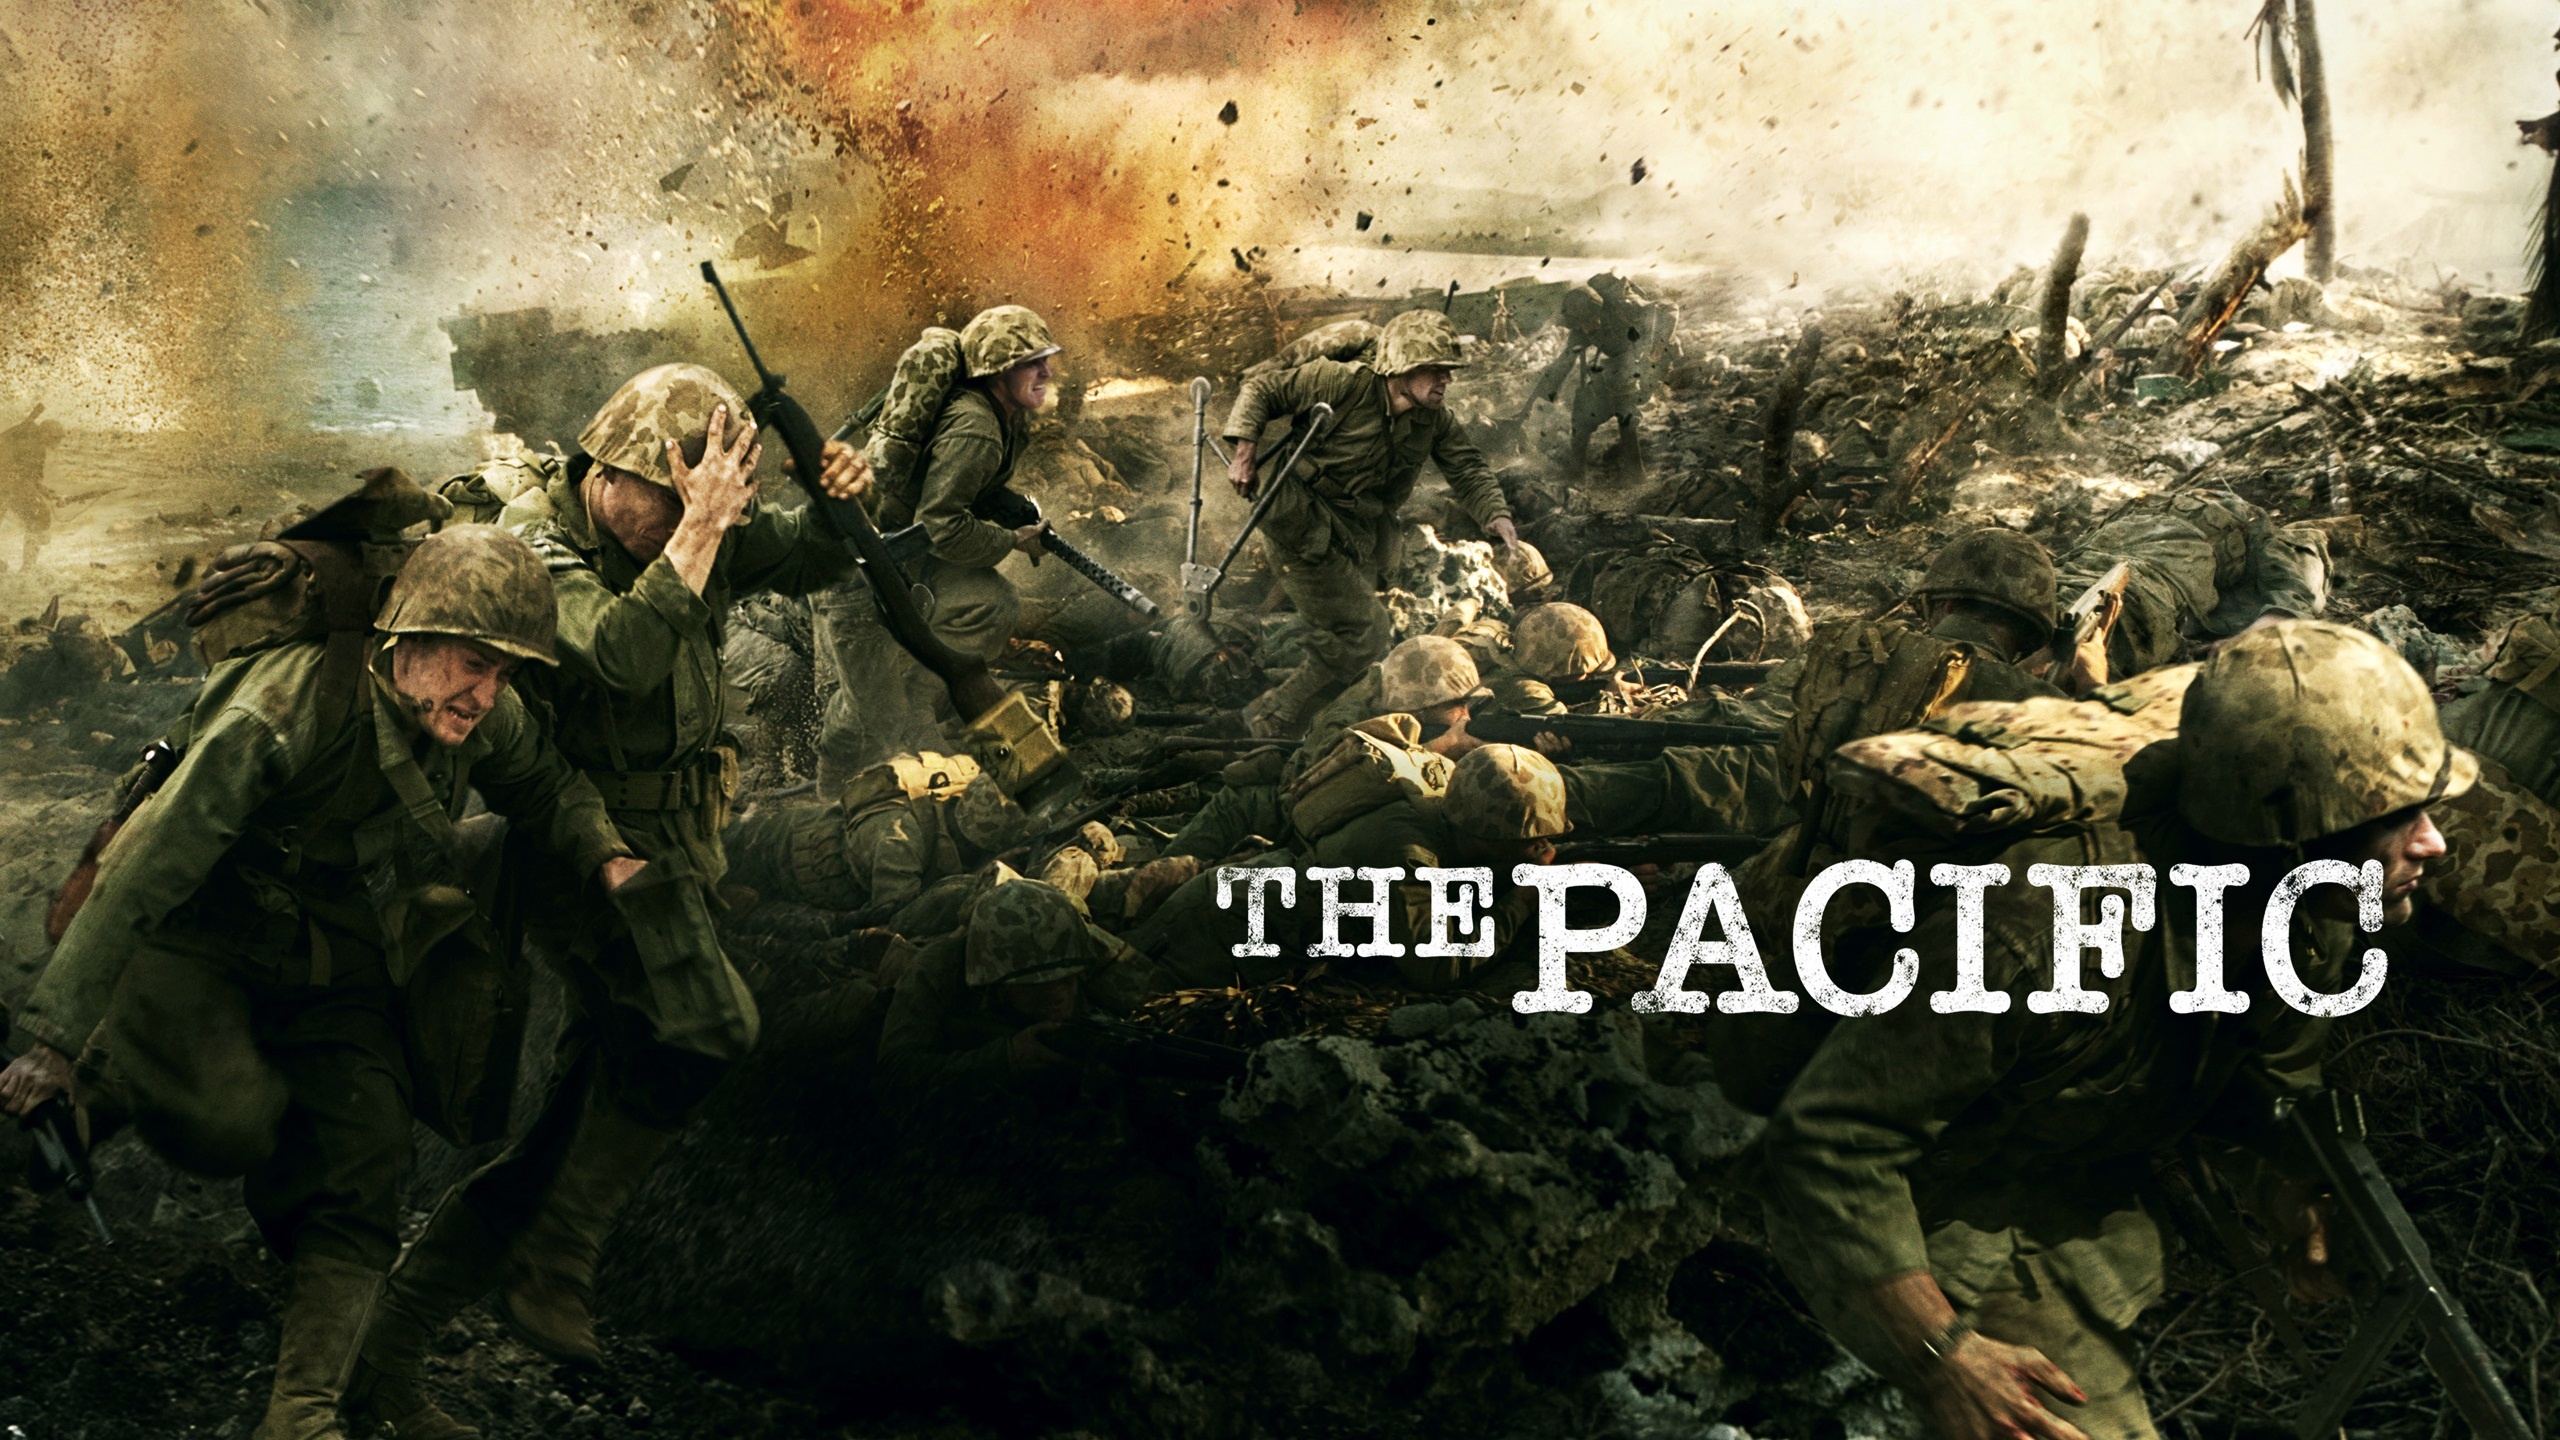 HBO The Pacific # 1920x1200. All For Desktop